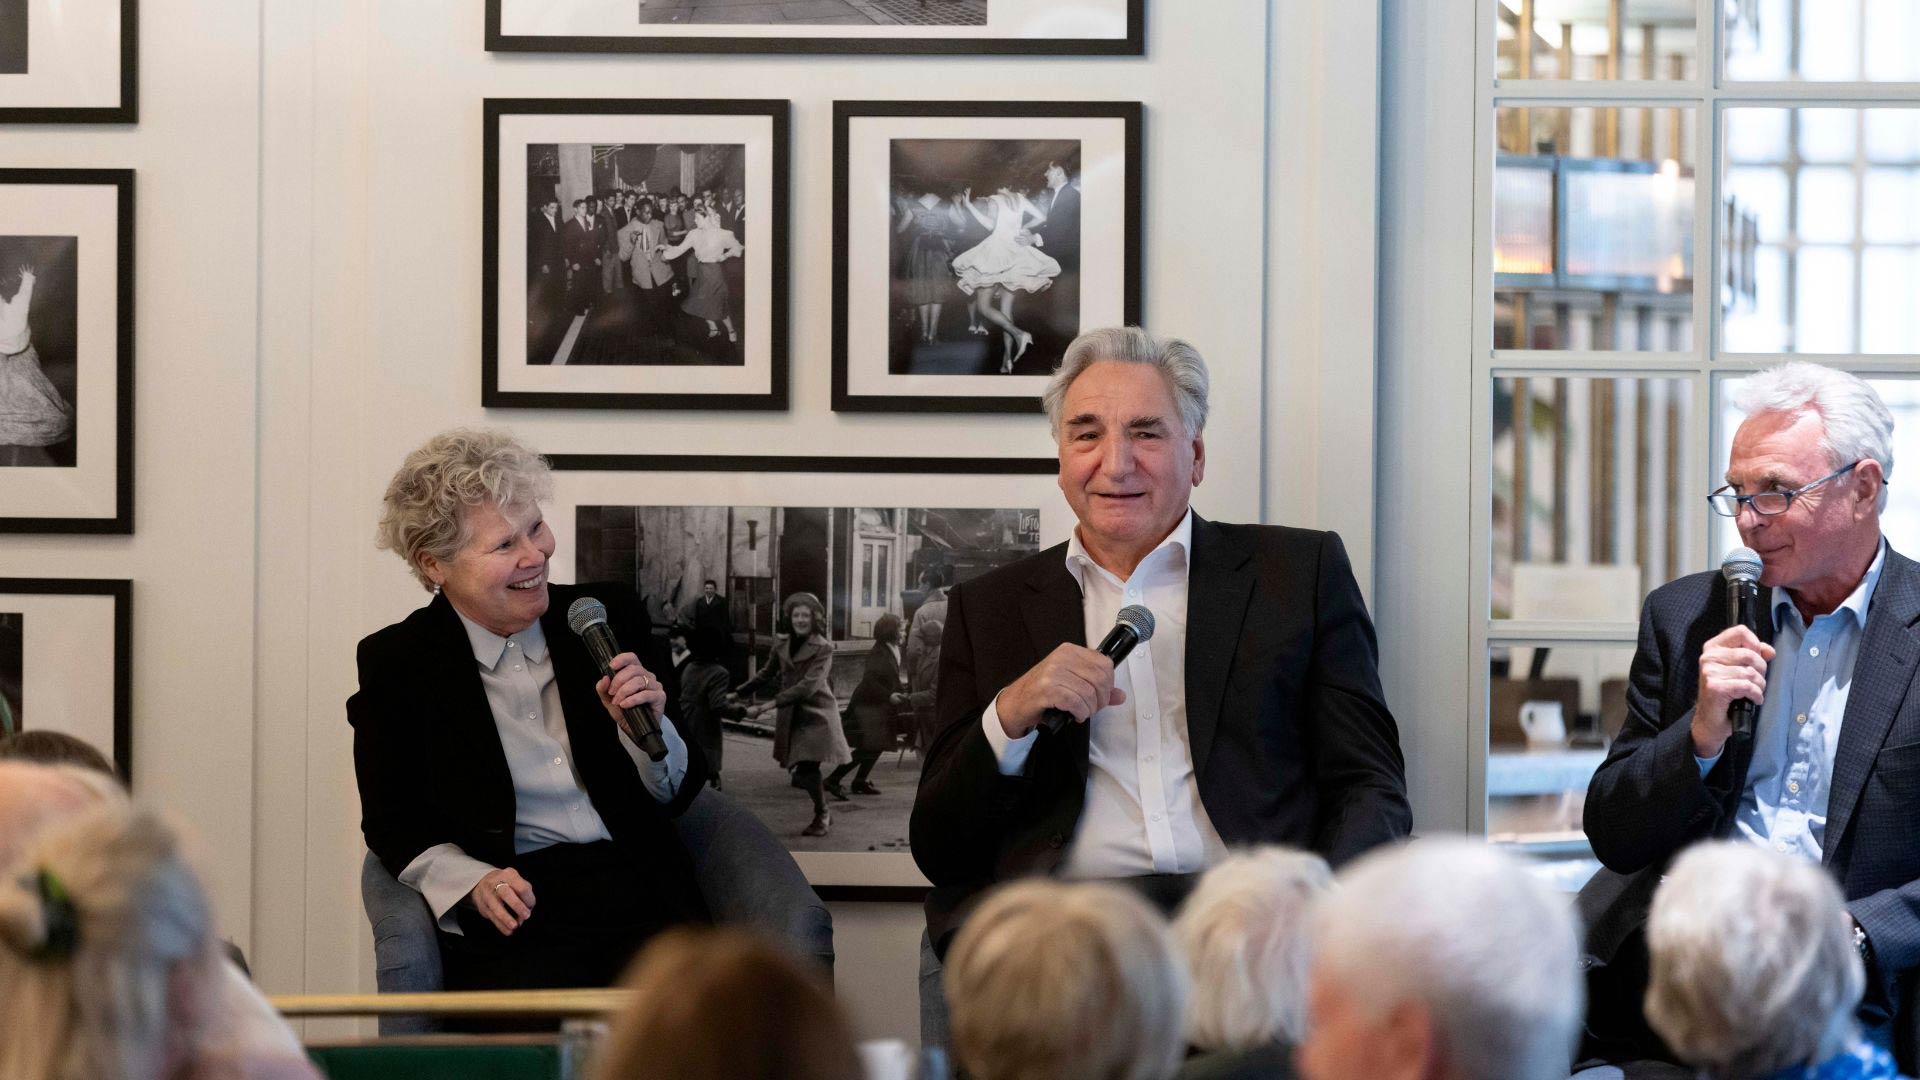 A star-studded sit down with Imelda Staunton and Jim Carter 